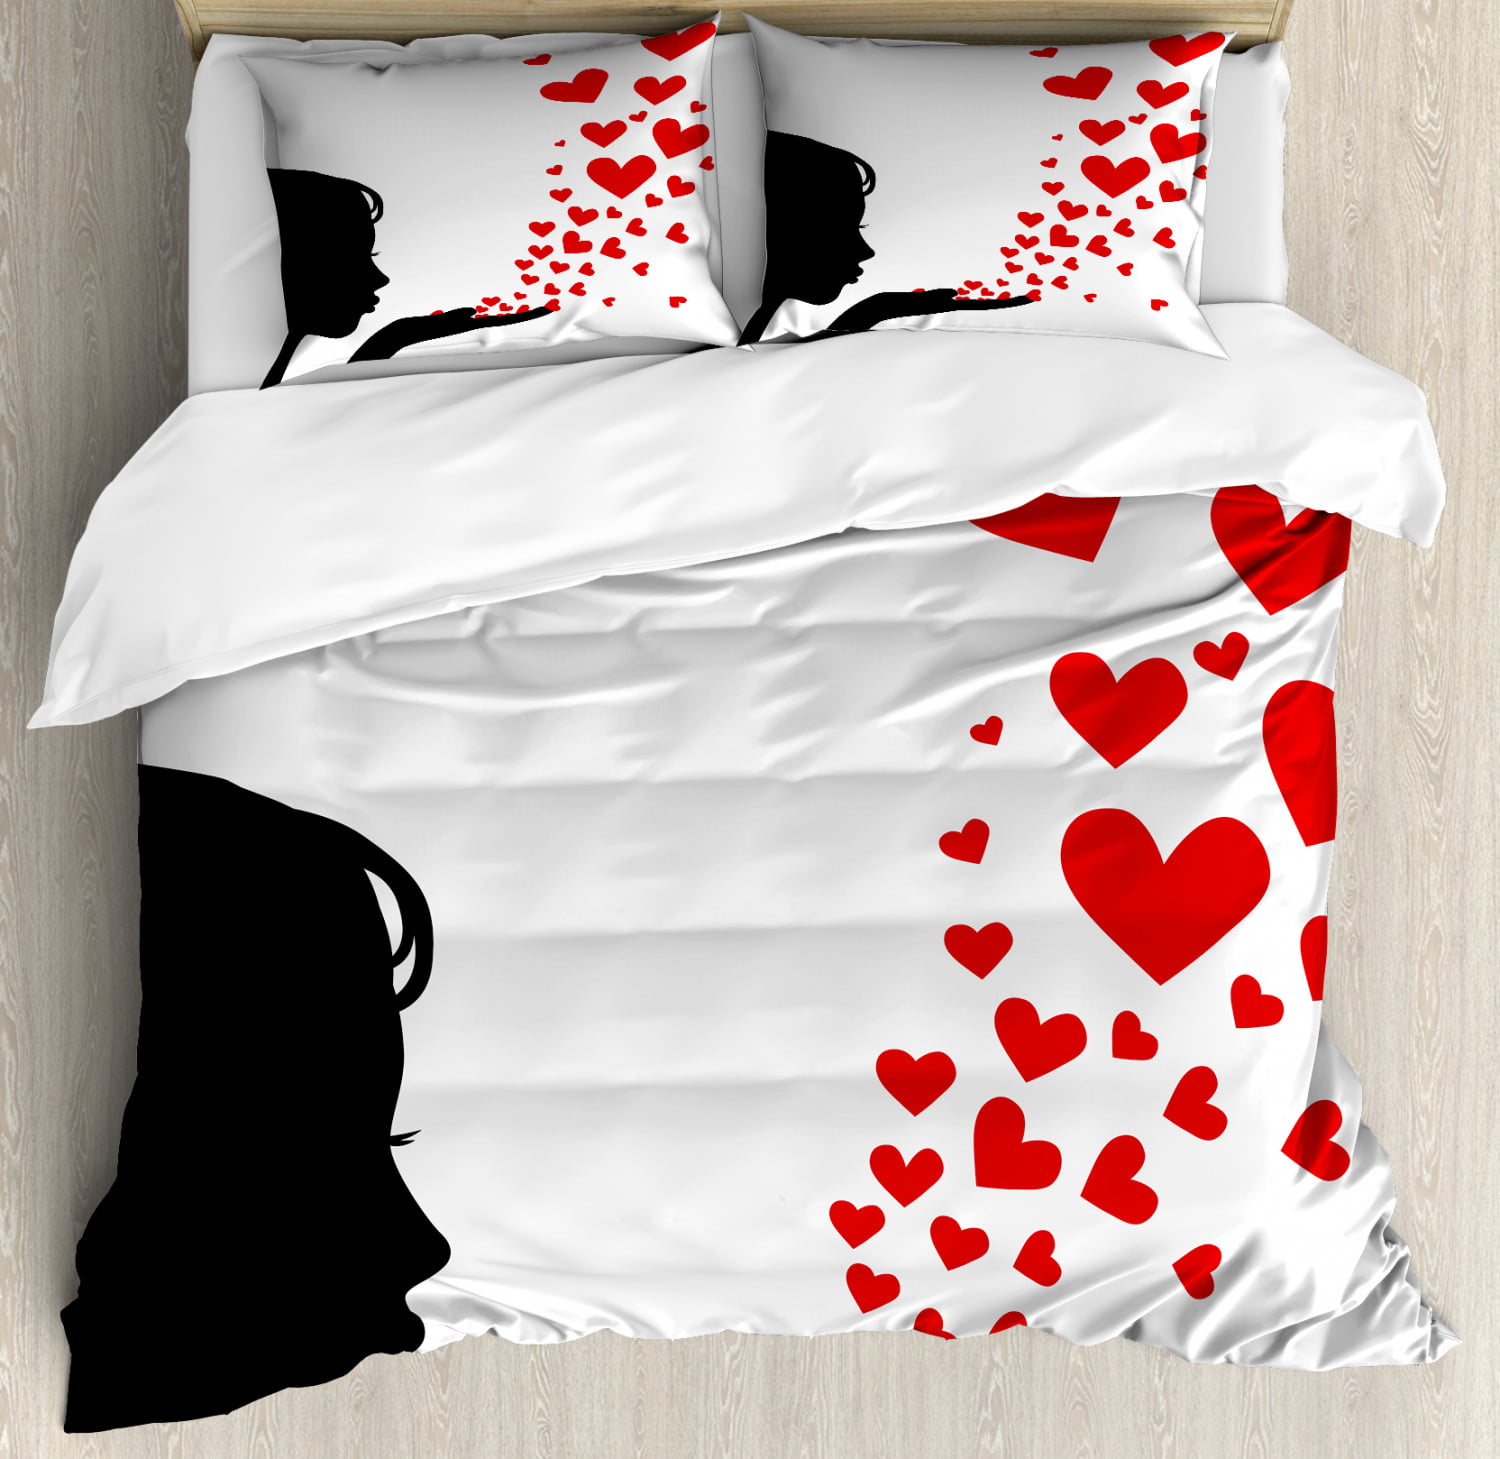 Piece Bedding Set With 2 Pillow Shams, Red Black And White Duvet Cover